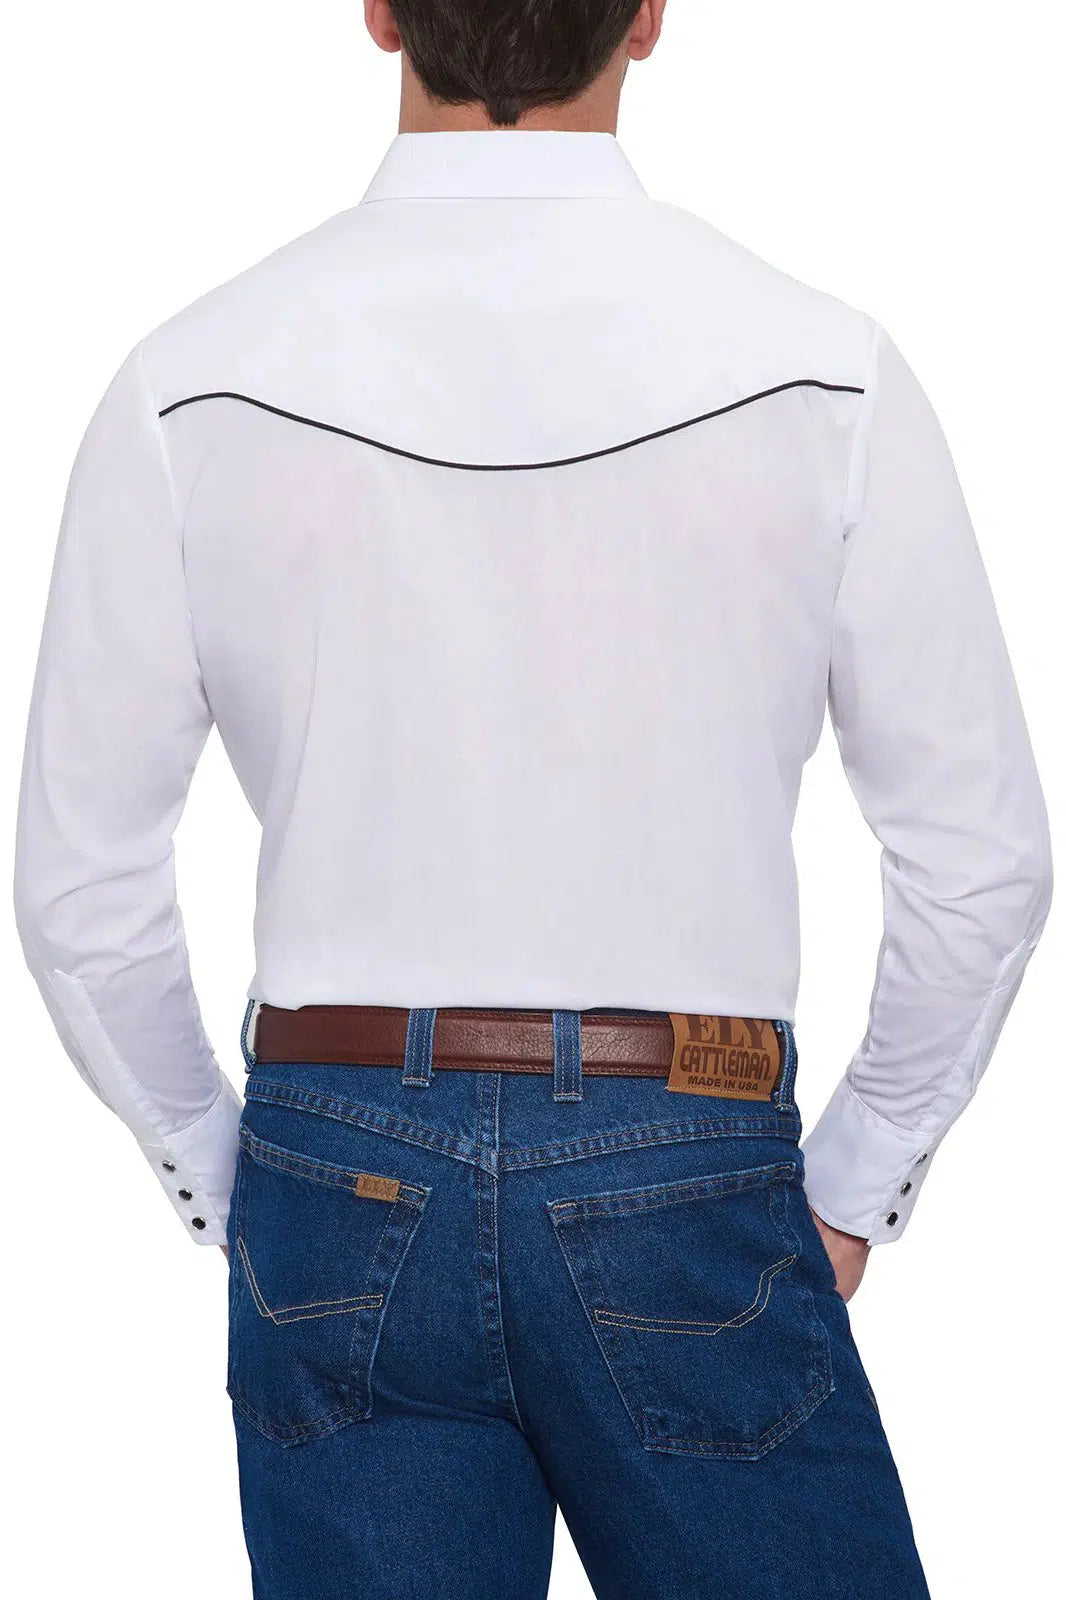 The back of a man wearing jeans and a white ELY Mens Embroidered Eagle Western Shirt.